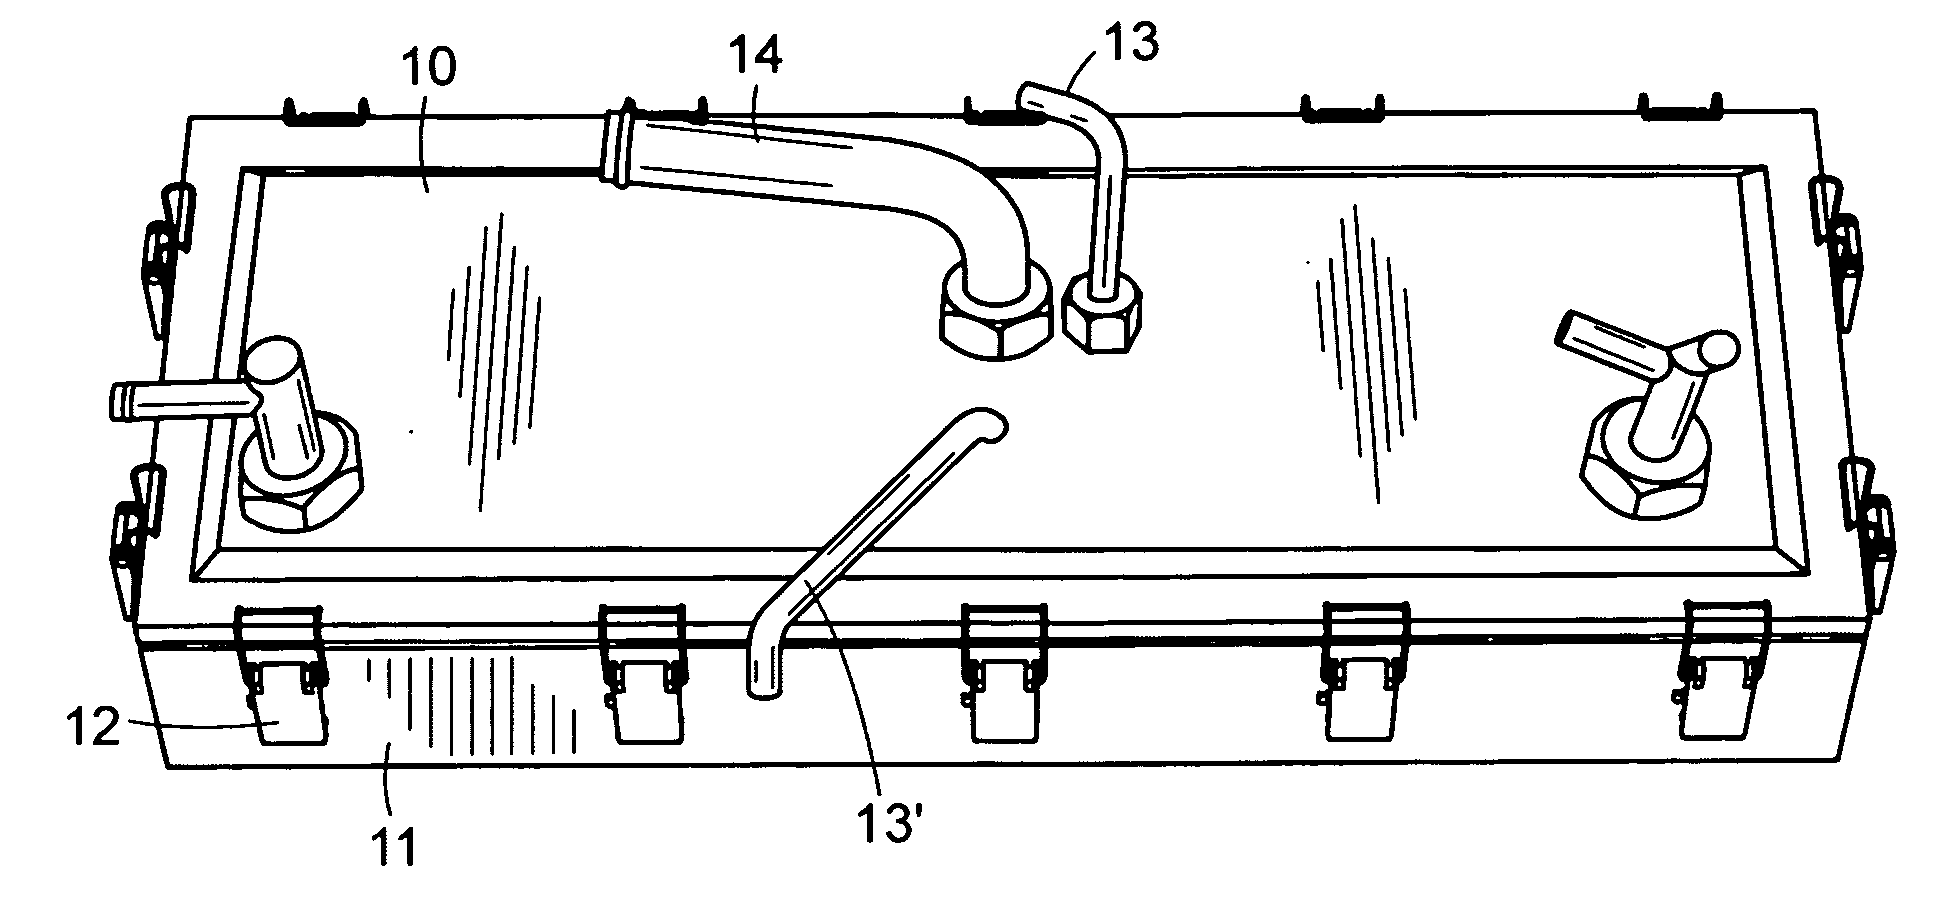 Coolant reservoir tank for fuel cell vehicle